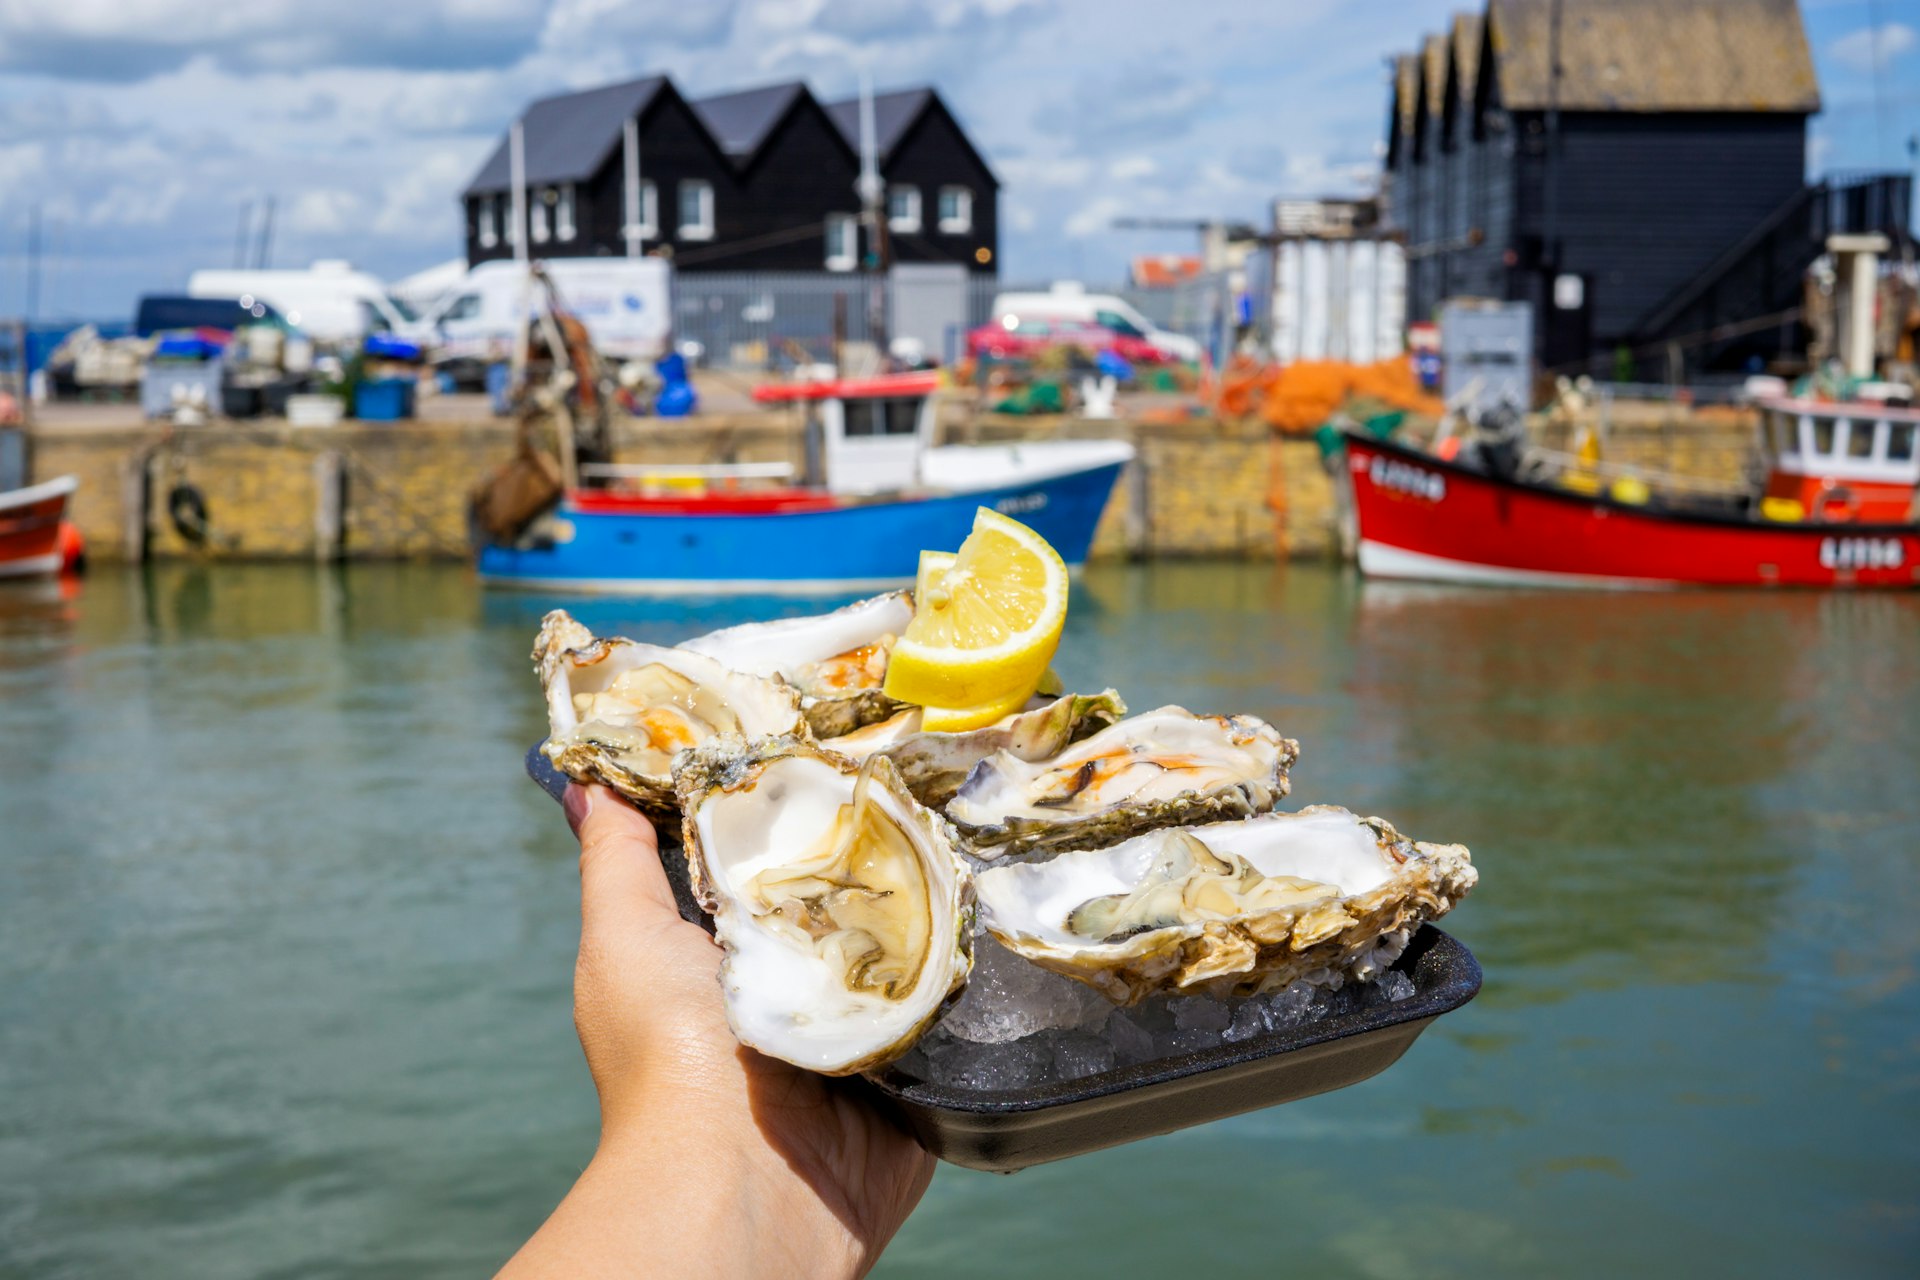 Oysters from the harbour in a seaside town on the north east coast of Kent, south England